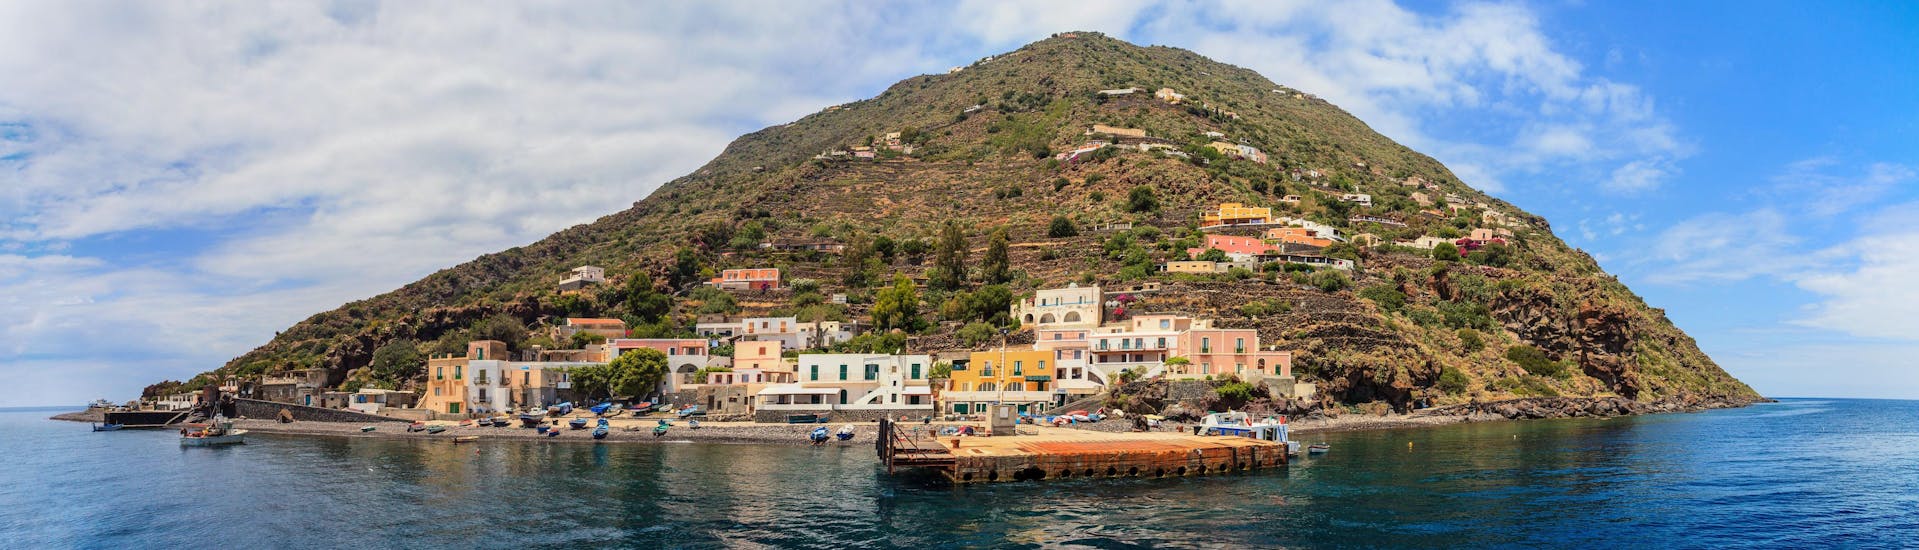 View of the Island of Alicudi, that you can visit with a boat trip to the Aeolian Islands.